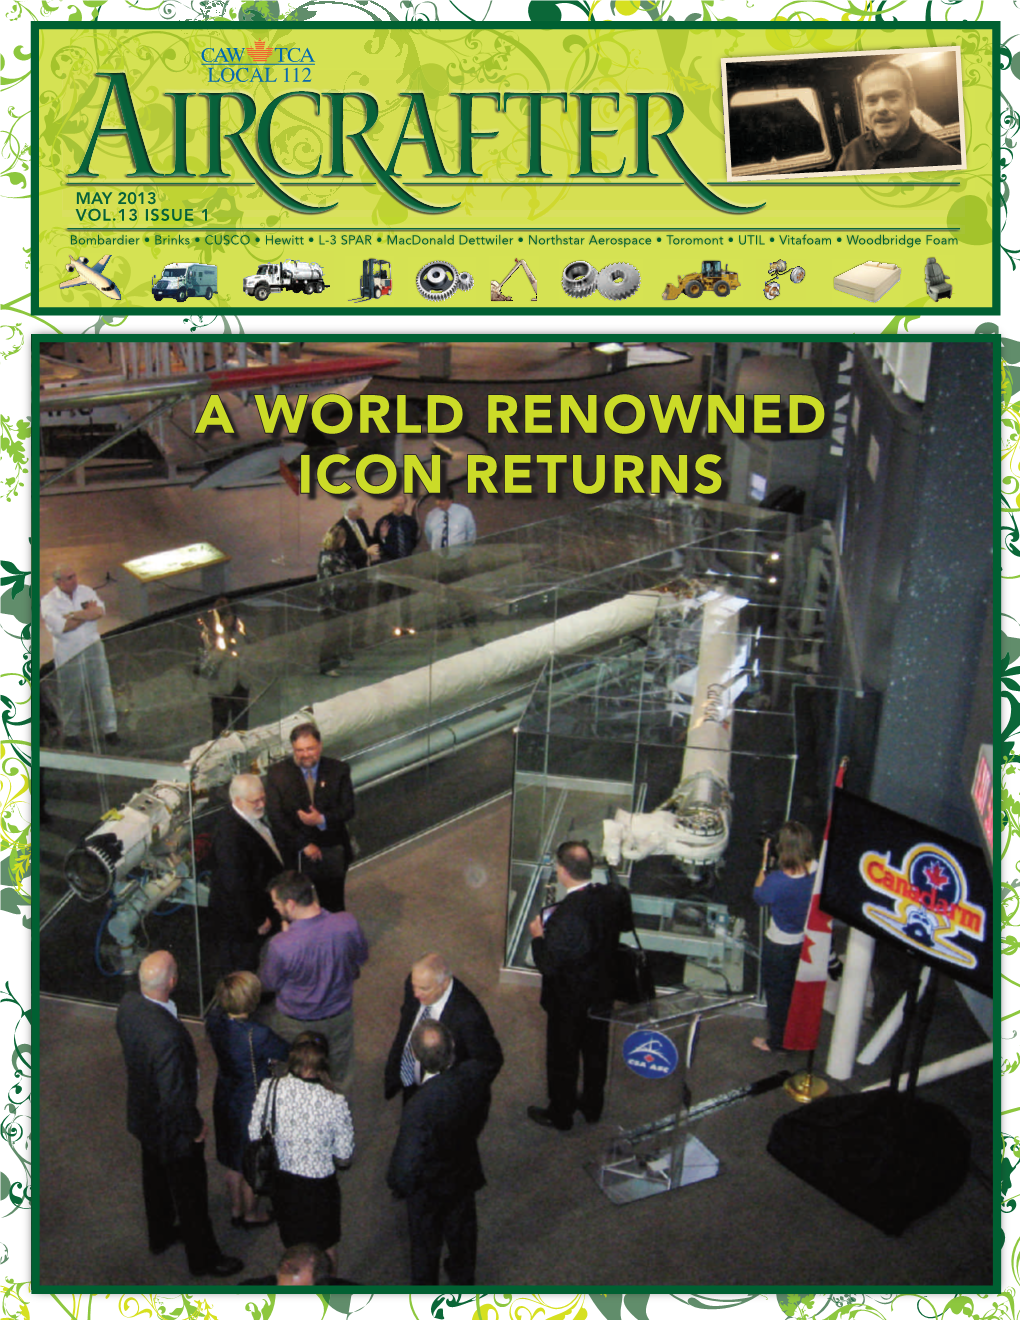 A World Renowned Icon Returns (June 11, 2013 / 09:02:41) 81402-1 Aircrafter Spring 2013 P02 Rev.Pdf .1